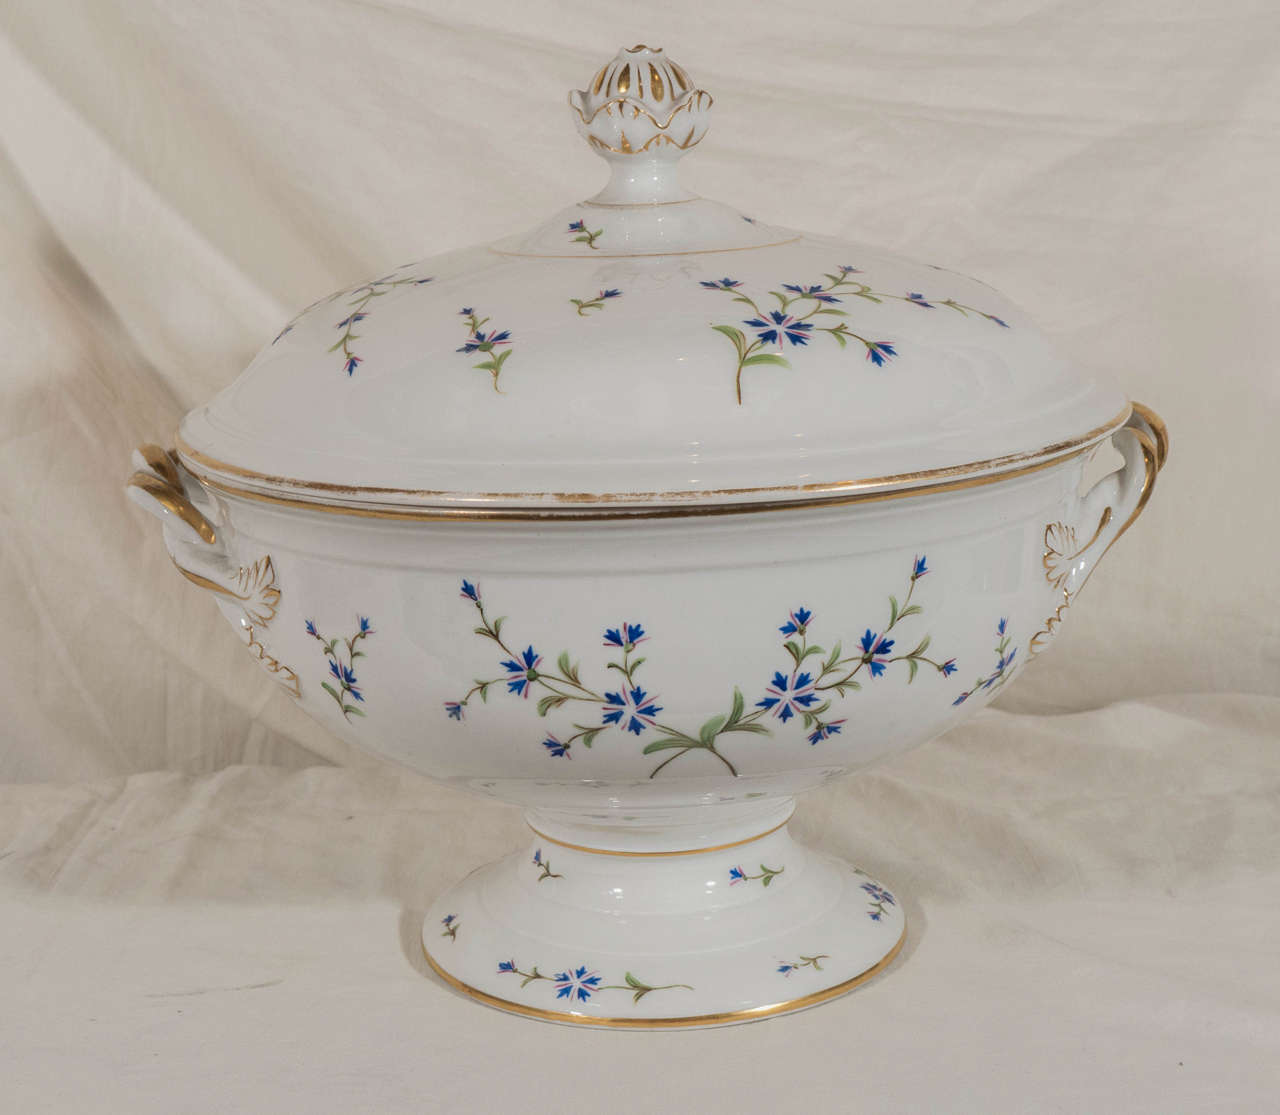 We are pleased to offer this 19th century Royal Copenhagen porcelain soup tureen with a 